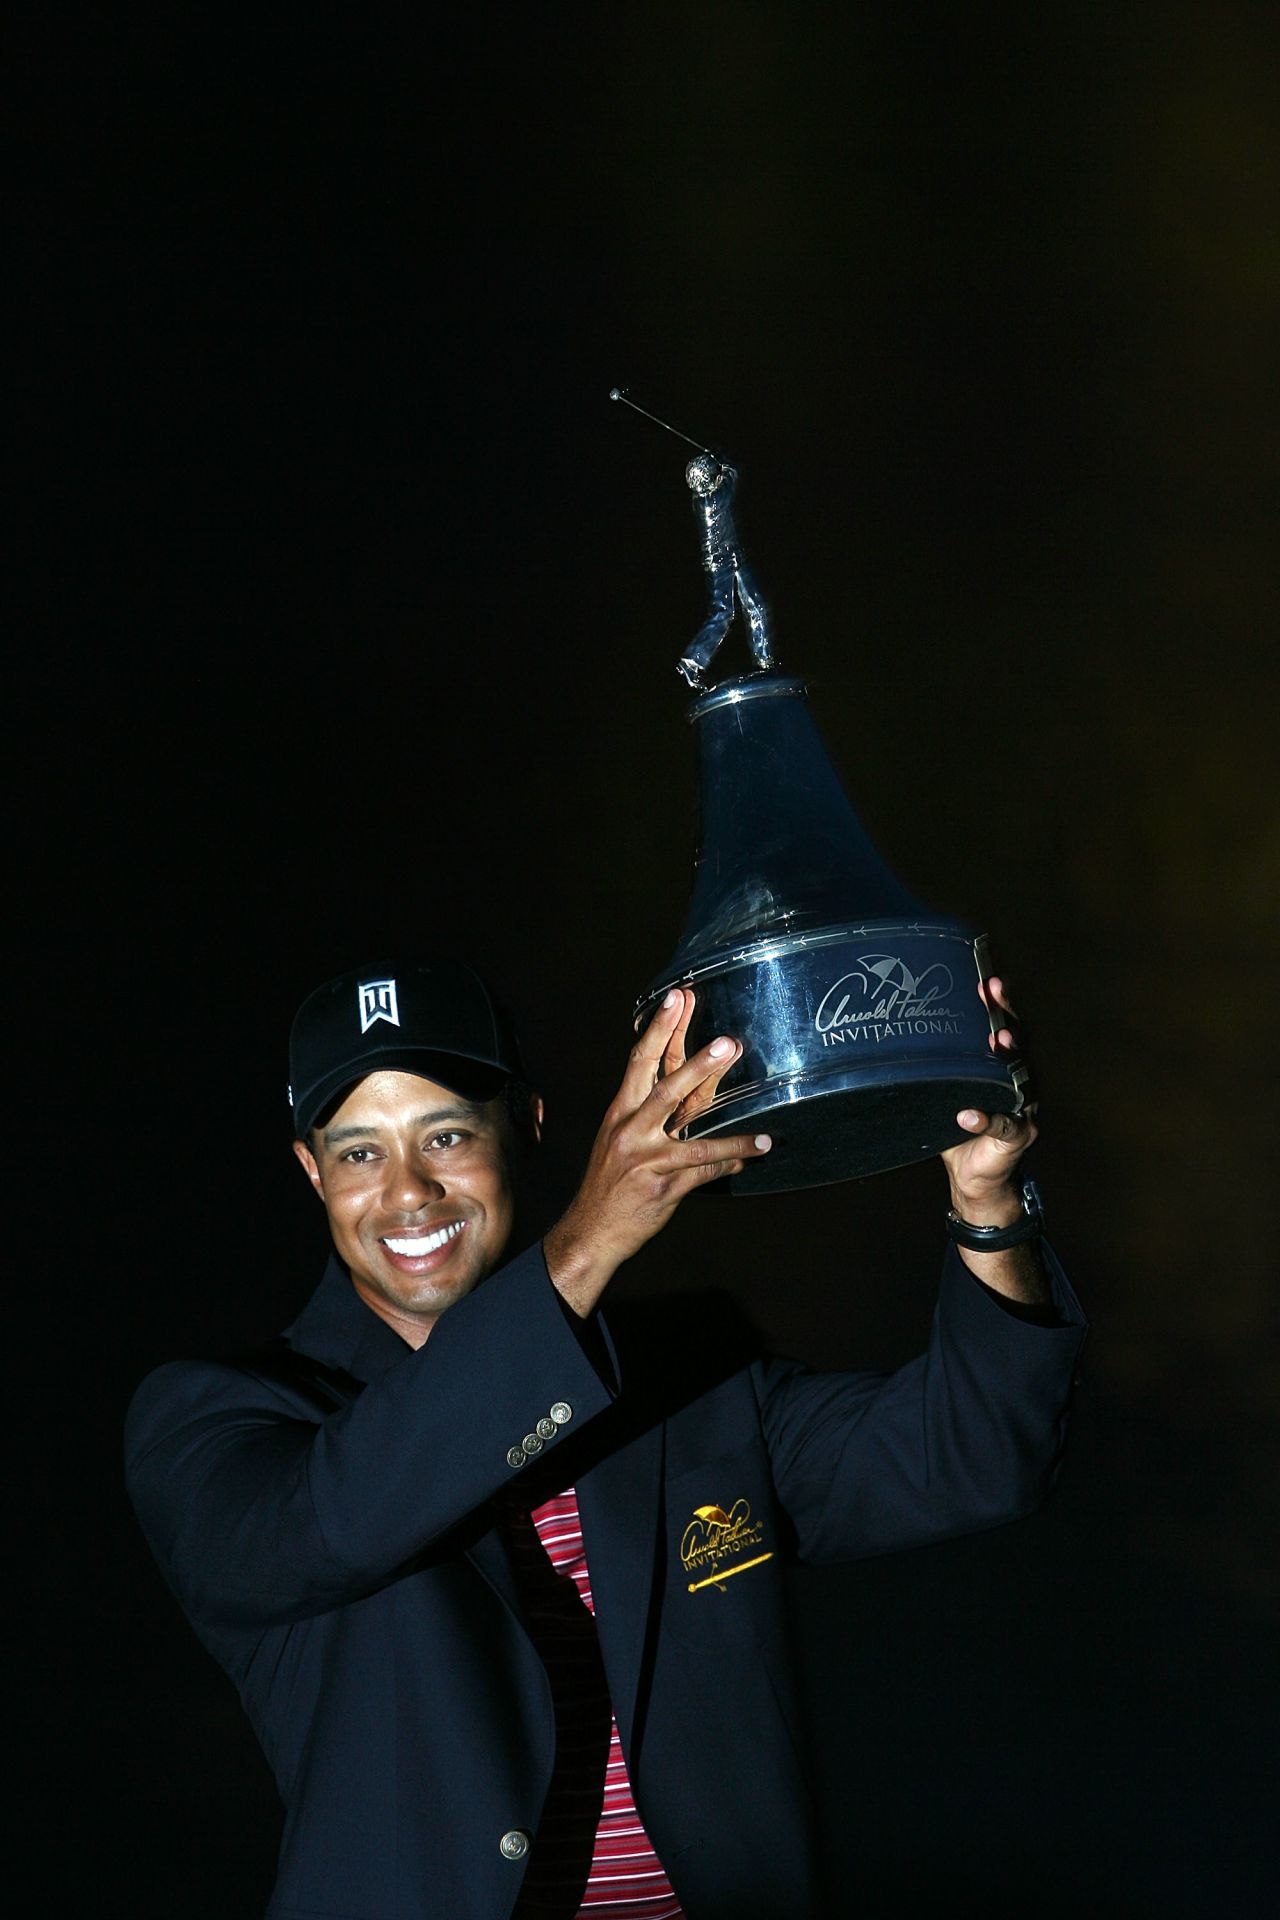 Wood sealed another one-shot win at Bay Hill in 2009, beating fellow American Sean O'Hair.